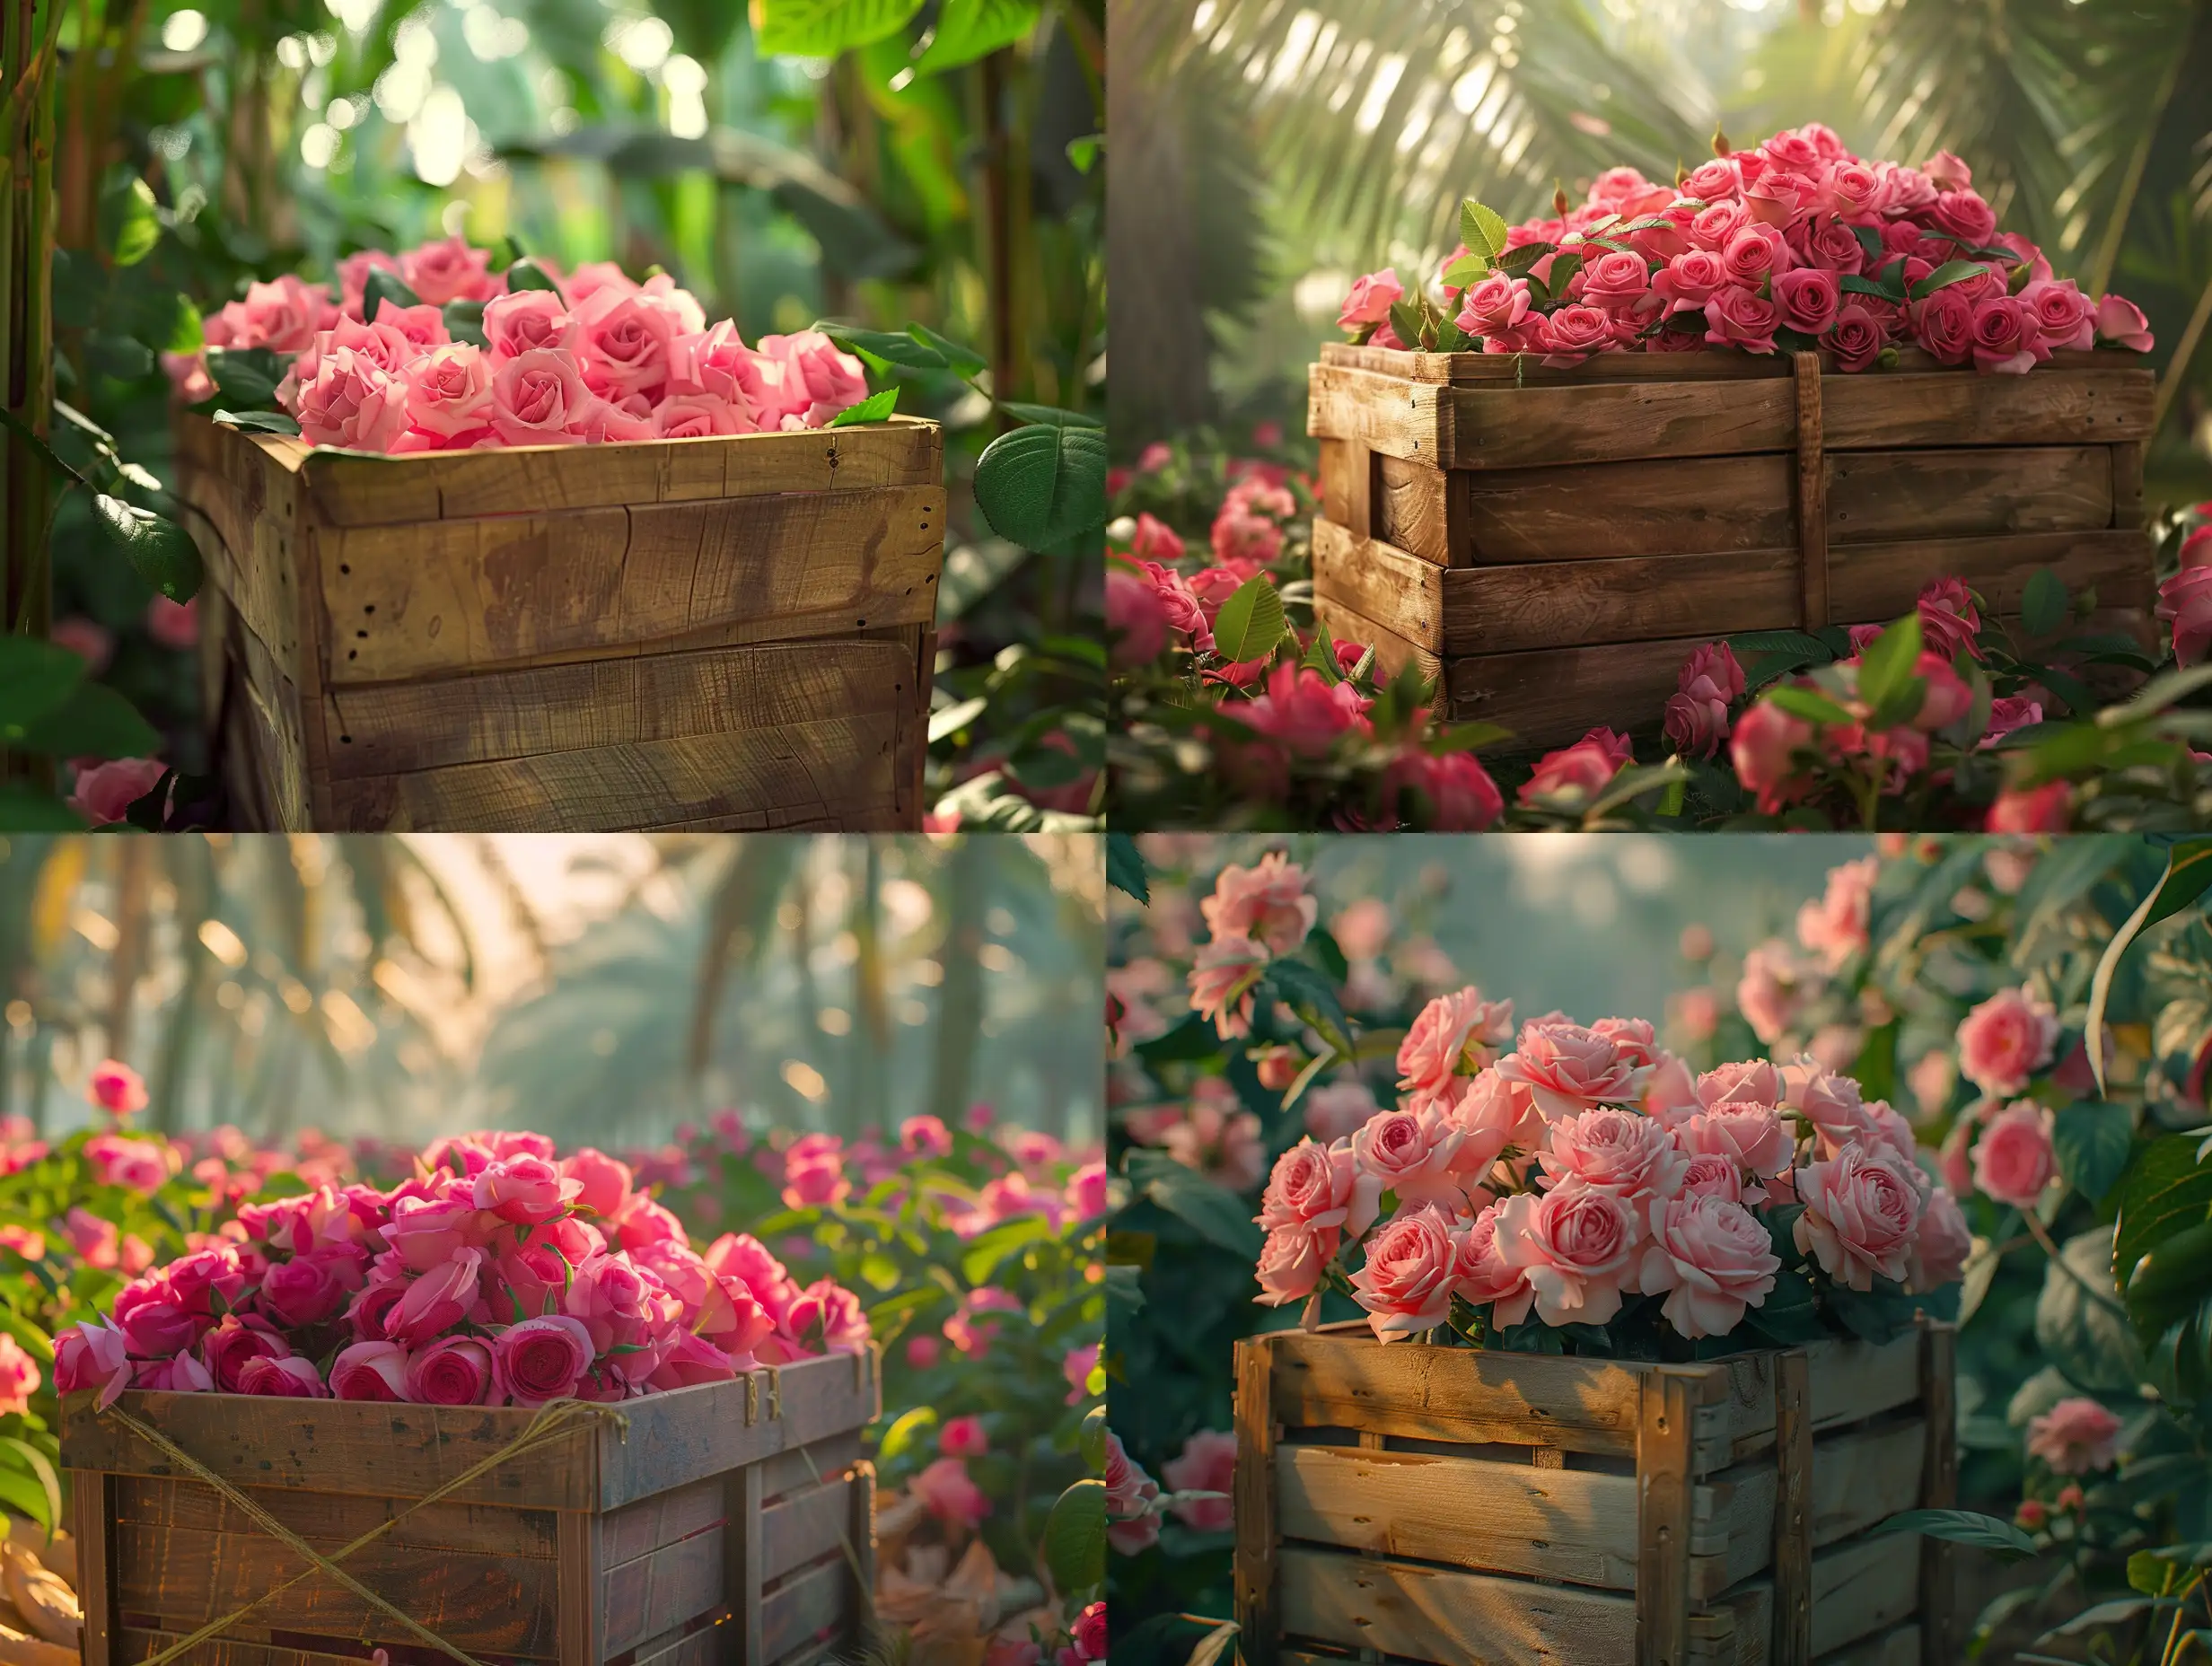  In a wooden basket filled with the famous pink Taif roses on one of Al Shifa farms, Landscape, Realism, Cinema 4D, Atmospheric perspective, Vibrant Colors, Jungle, Rangefinder Camera, Cinematic Lighting, Love‎,